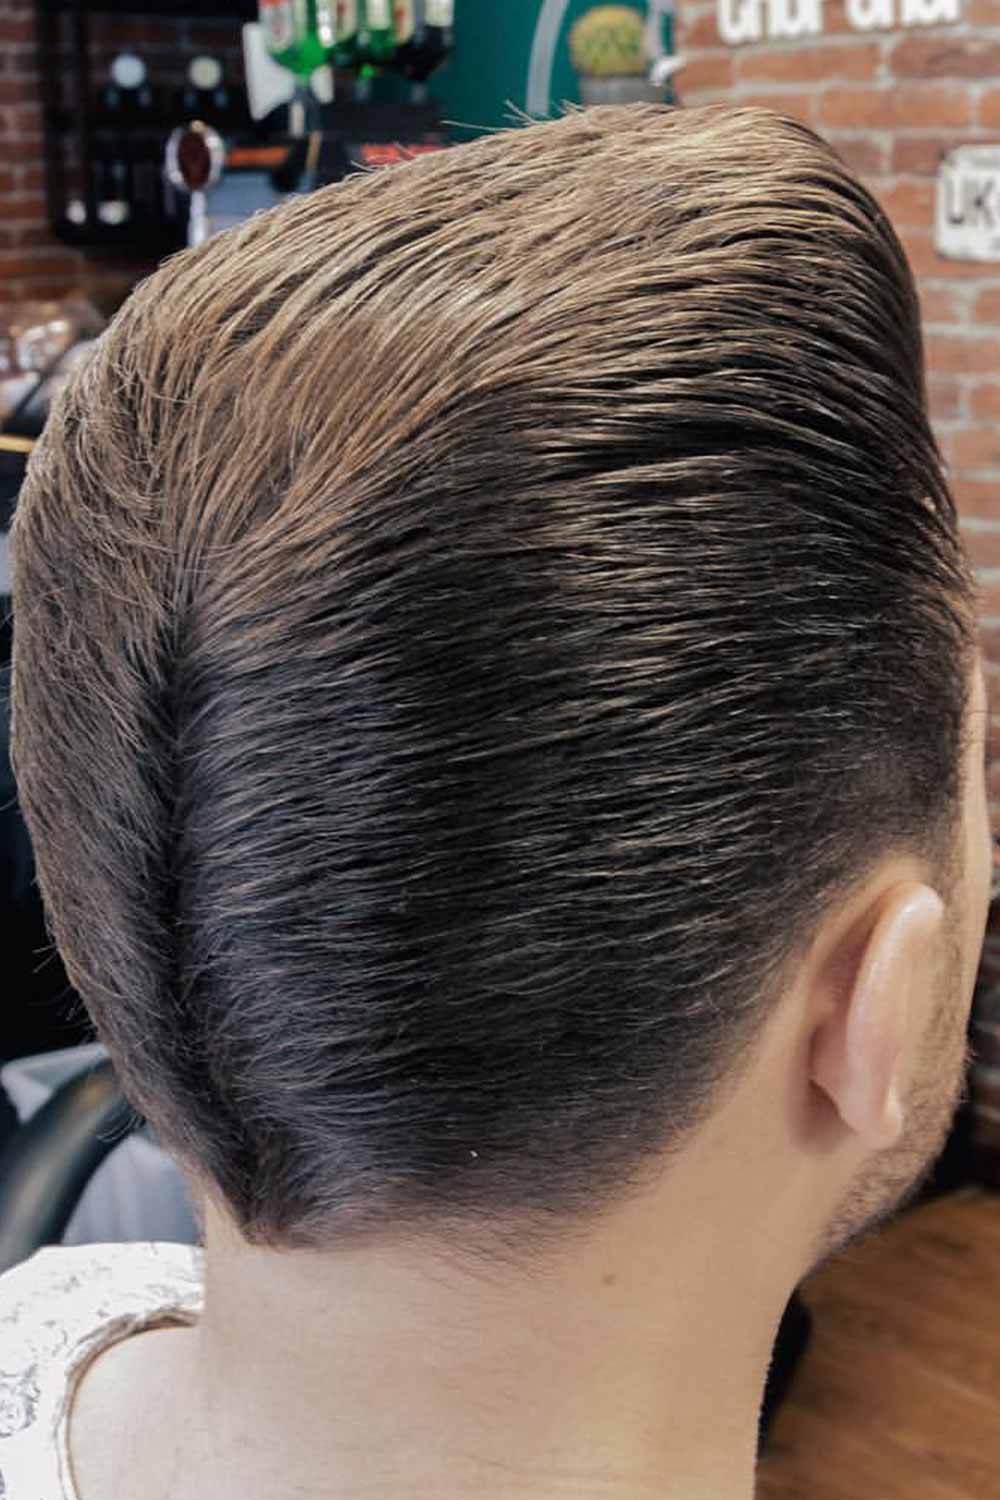 Is the ducktail haircut still popular enough for Dating women and appearing  cool? : r/NoStupidQuestions